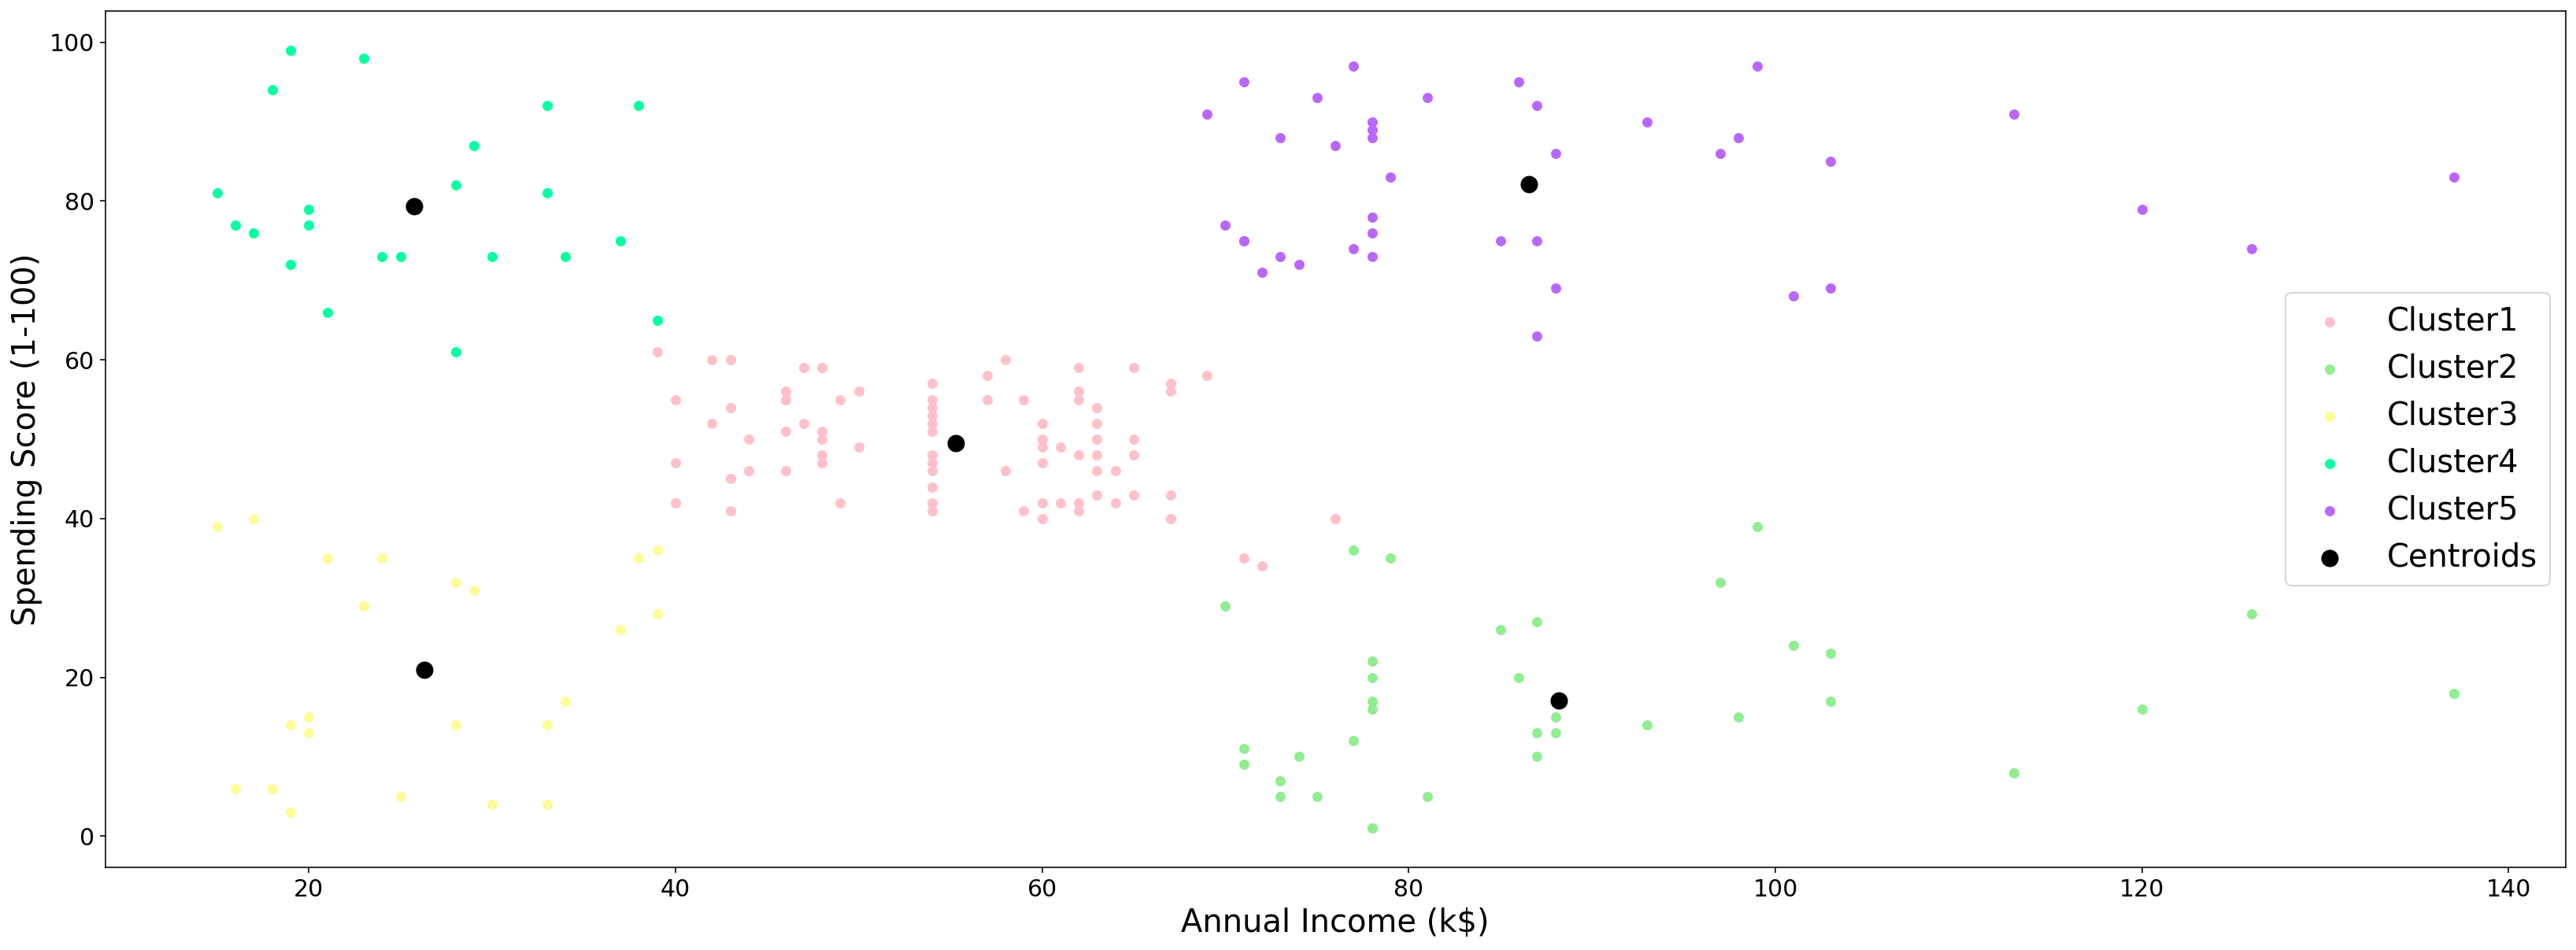 K-means clustering_files/figure-gfm/cell-7-output-1.png